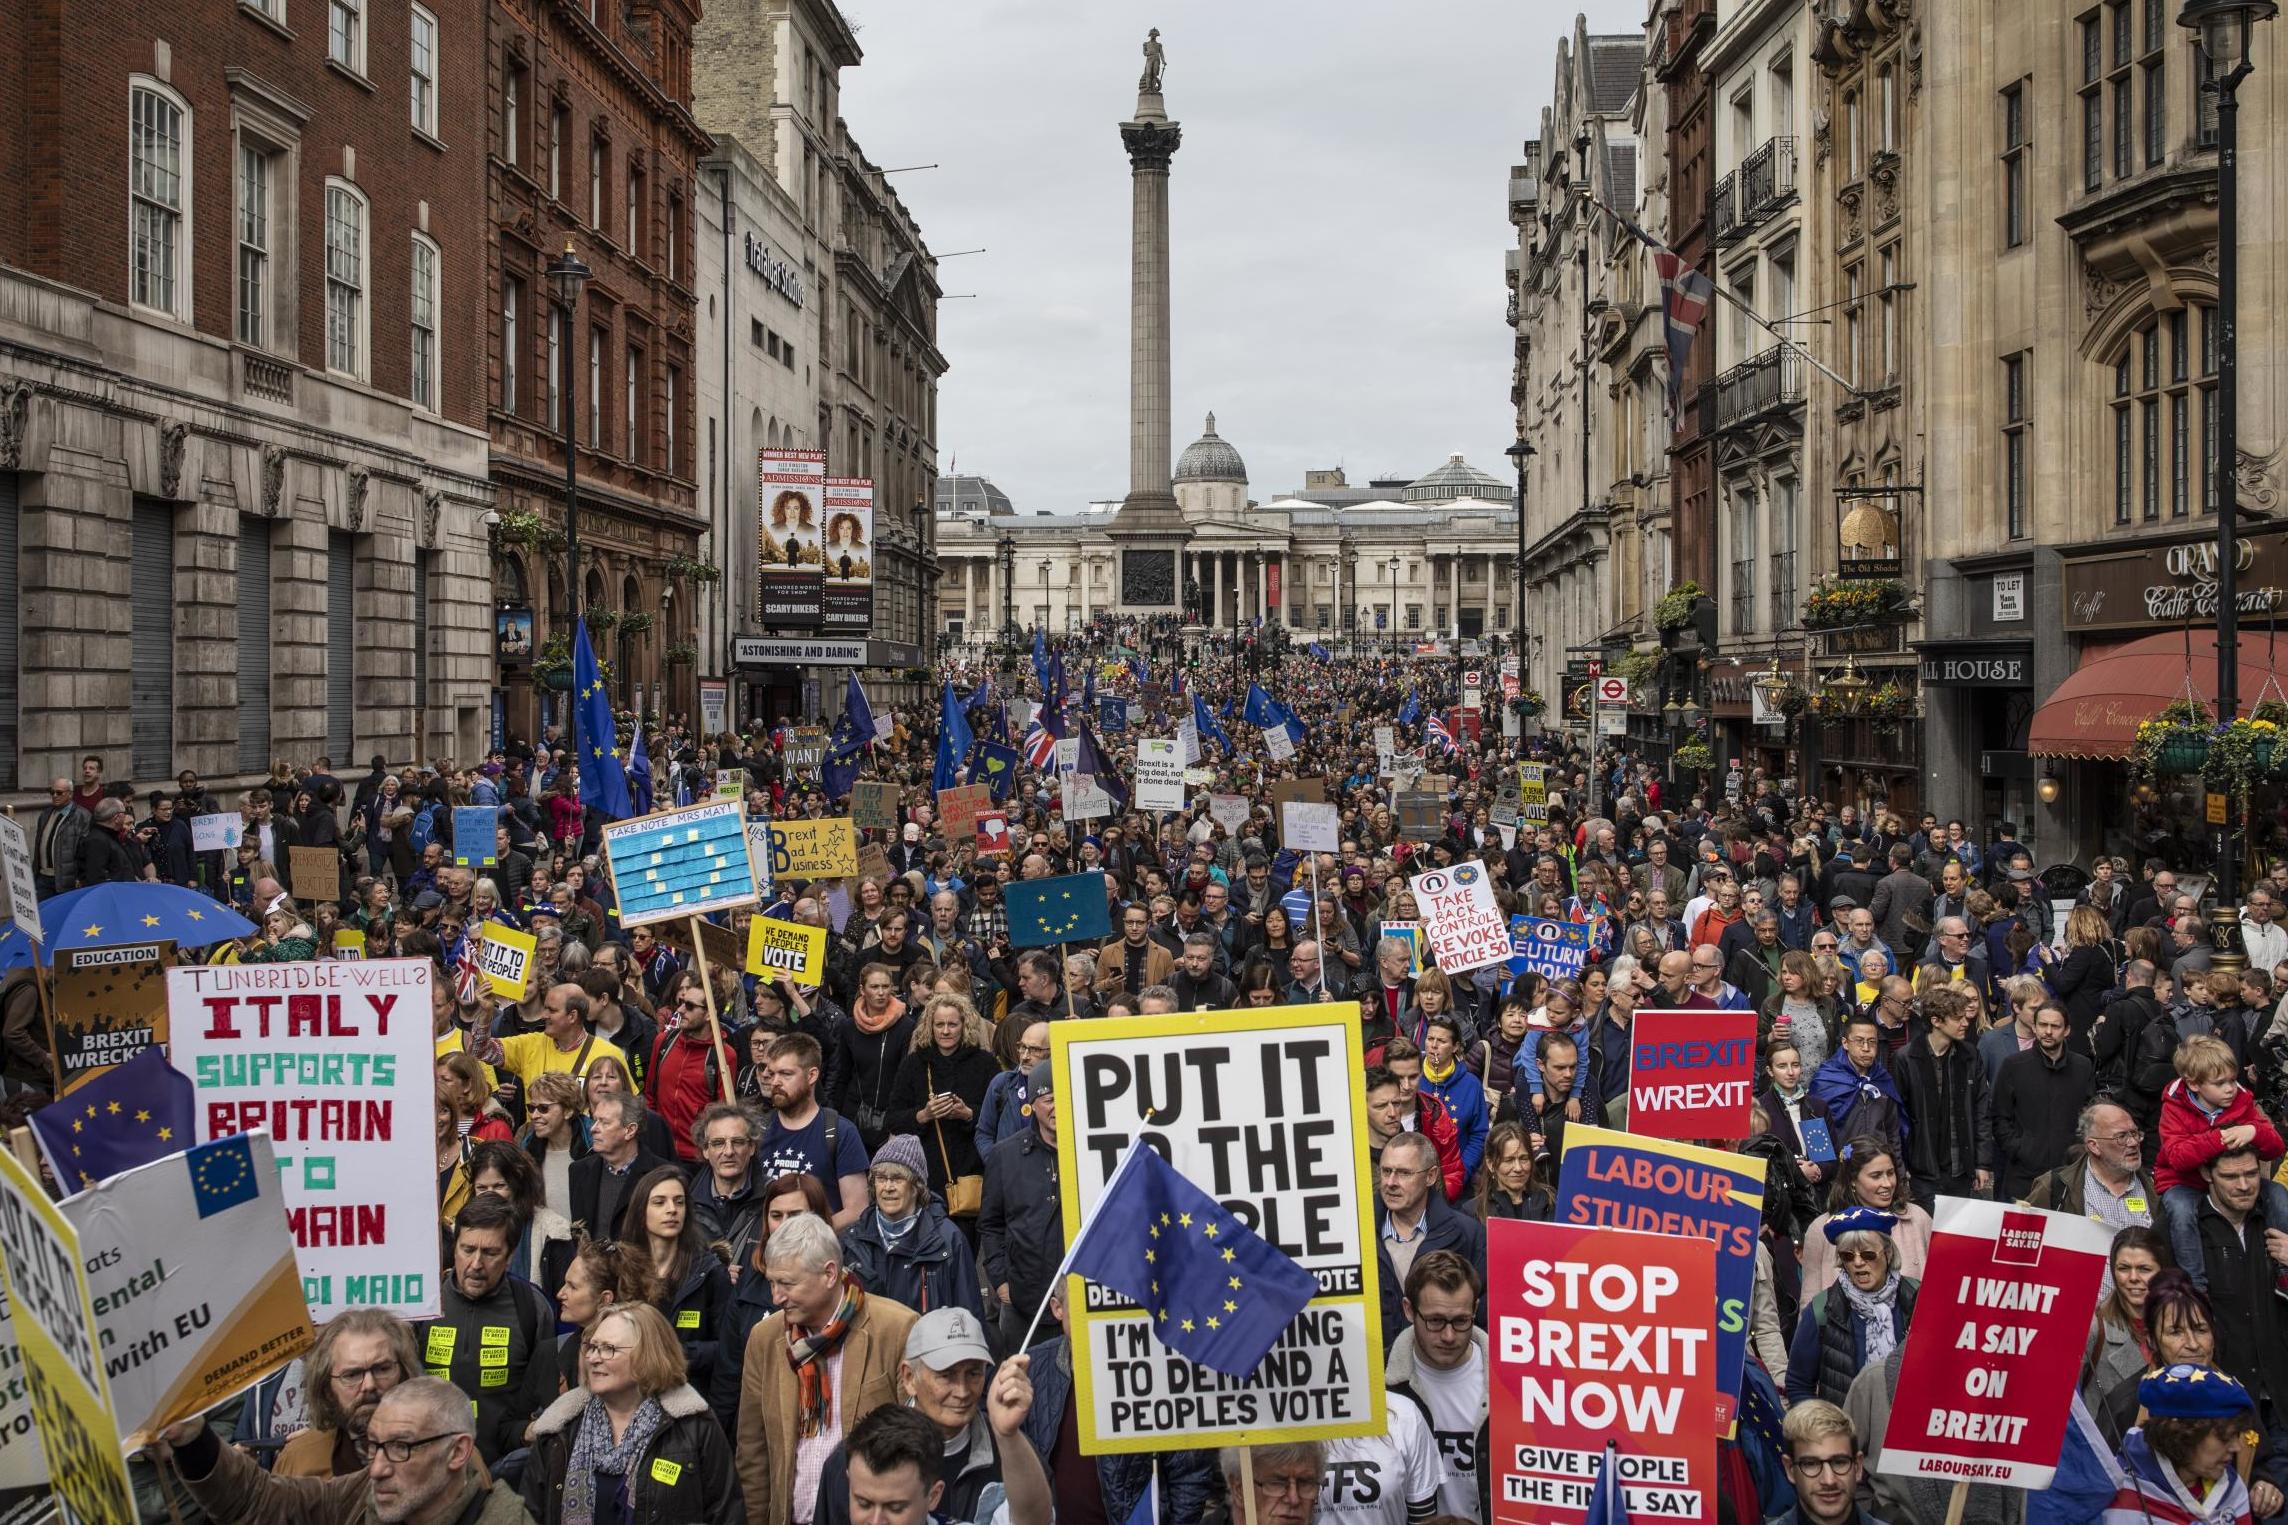 The Put It To The People March on Whitehall earlier this year